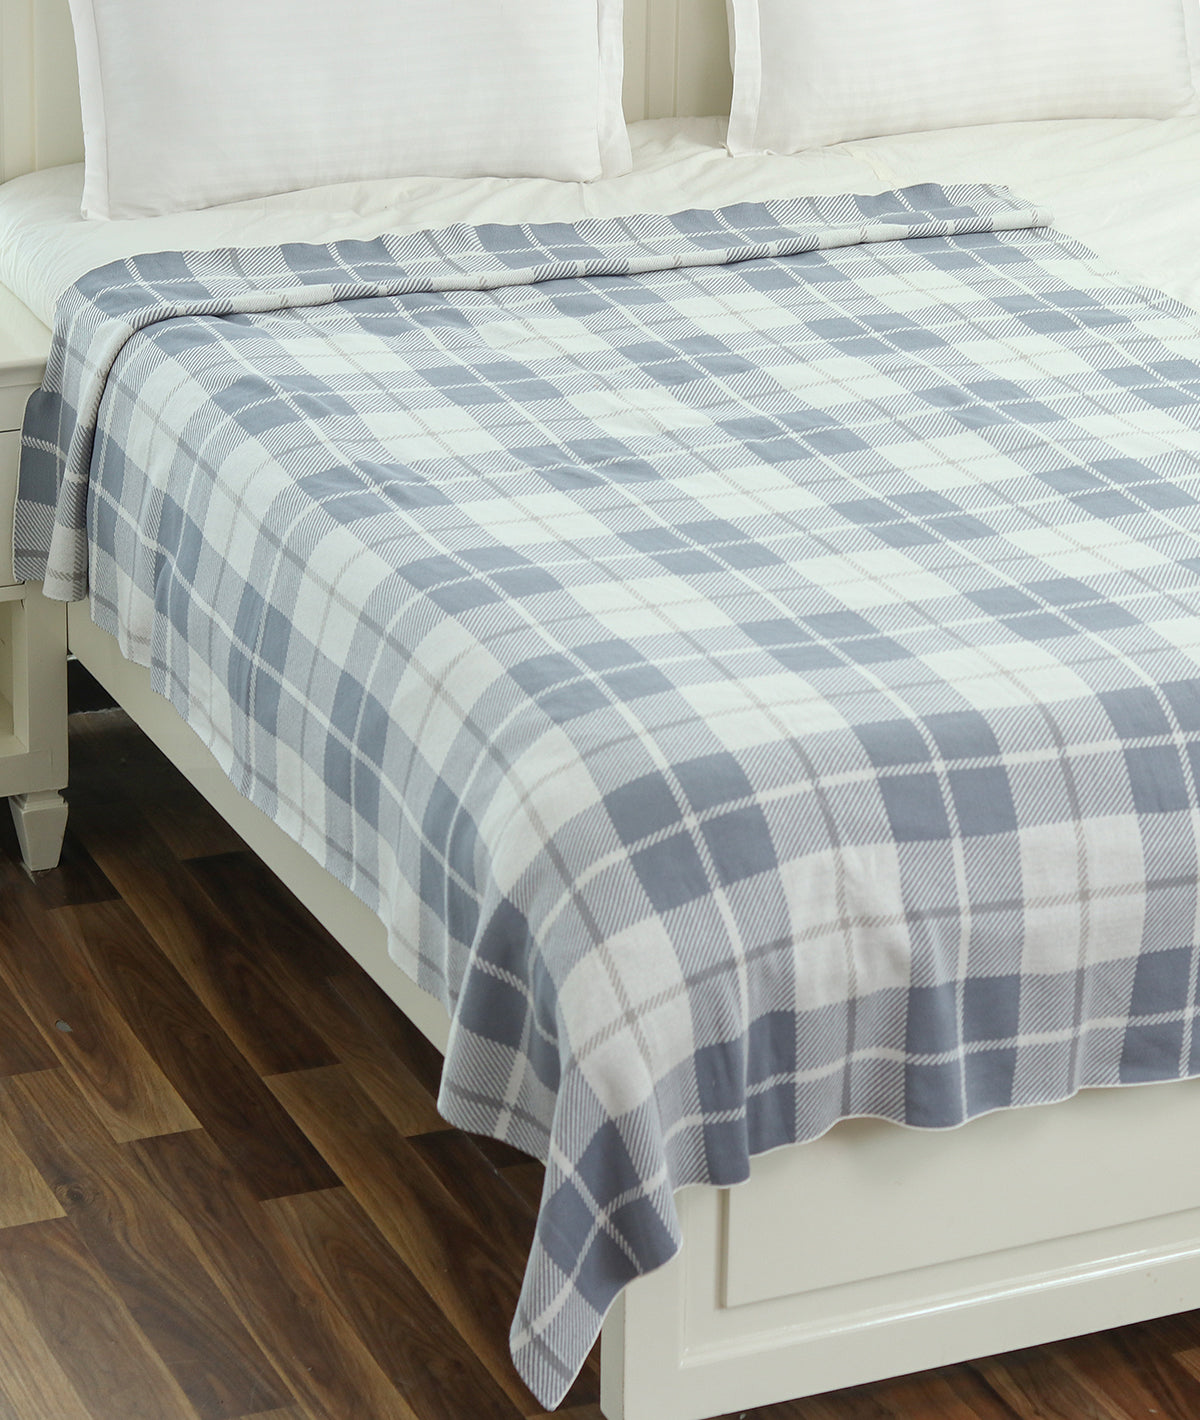 Plaid Ocean Cotton Knitted AC Blanket/ Dohar For Round of the Year use (152 cm x 228 cm)